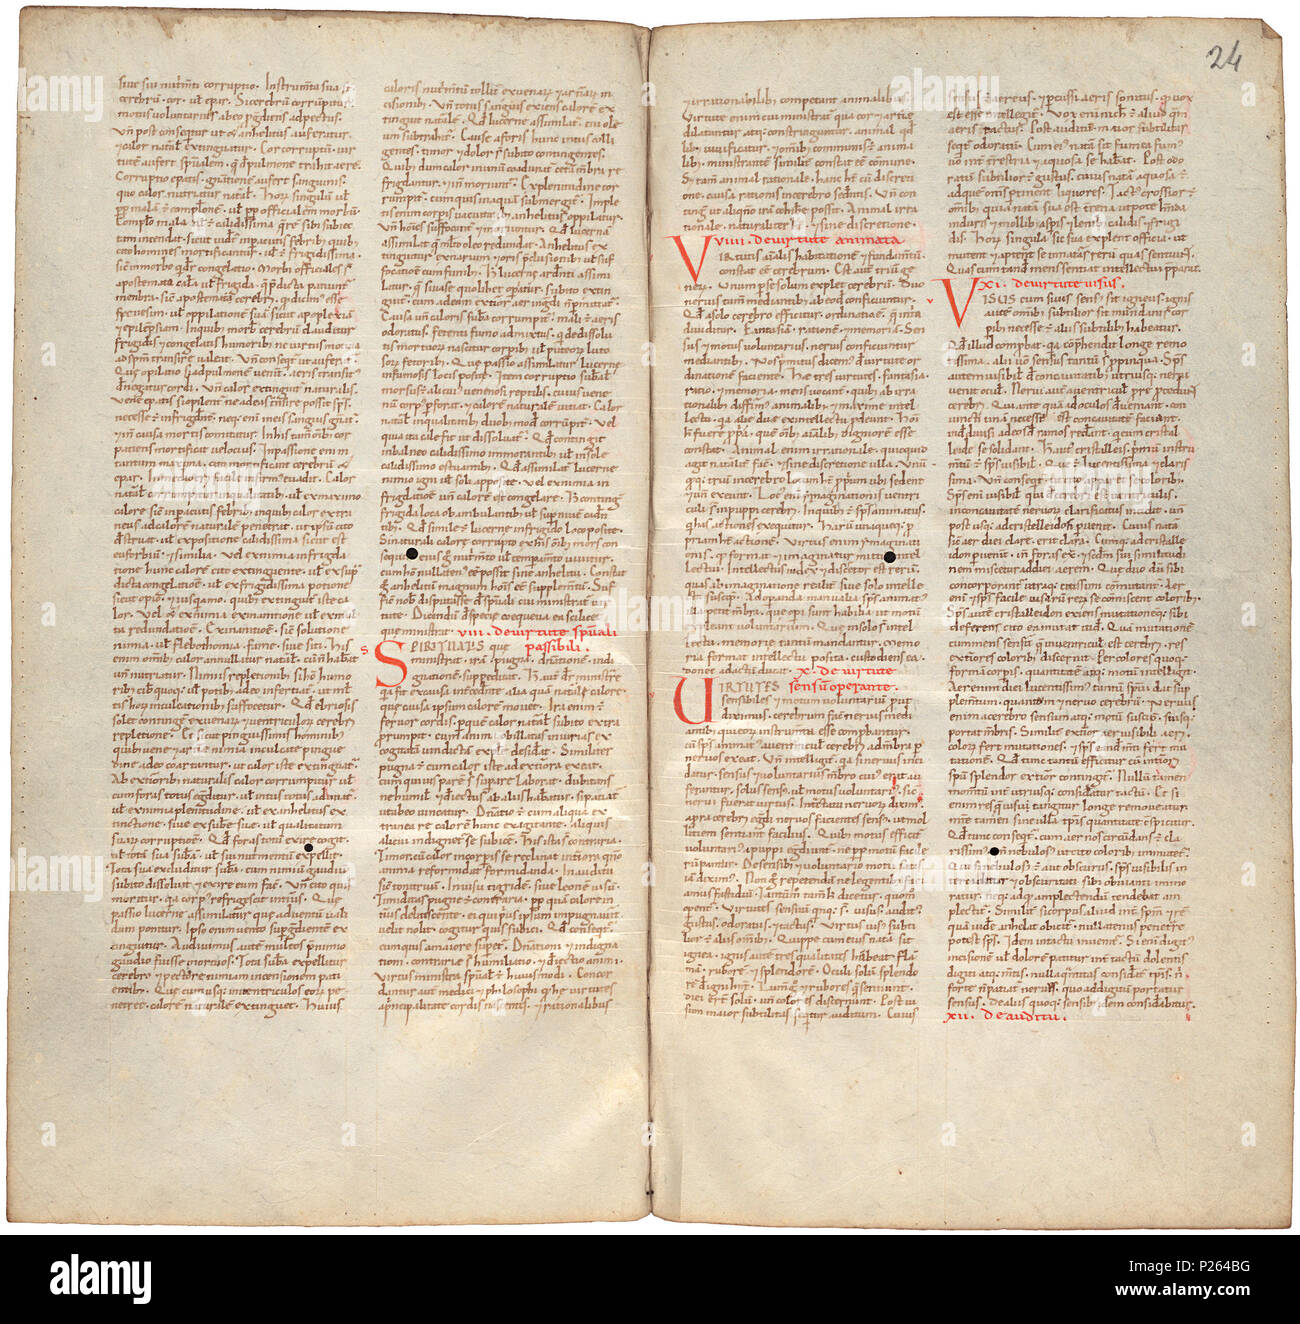 . Pantegni pars prima theorica (lib. I-X) - folios 023v (left) and 024r (right)  .  Lefthand side folio 023v; righthand side folio 024r from an 11th century copy of the Liber pantegni. This is the earliest known copy (prior to 1086) of the Liber pantegni, made at Monte Cassino under the supervision of Constantine the African. It is dedicated to Abbot Desiderius of Monte Cassino (1027-1087), before he became Pope Victor III. Read backgroud information in Dutch and in English. . Constantine the African (ca. 1010-1098/9) 175 Liber pantegni - KB 73 J 6 - folios 023v (left) and 024r (right) Stock Photo